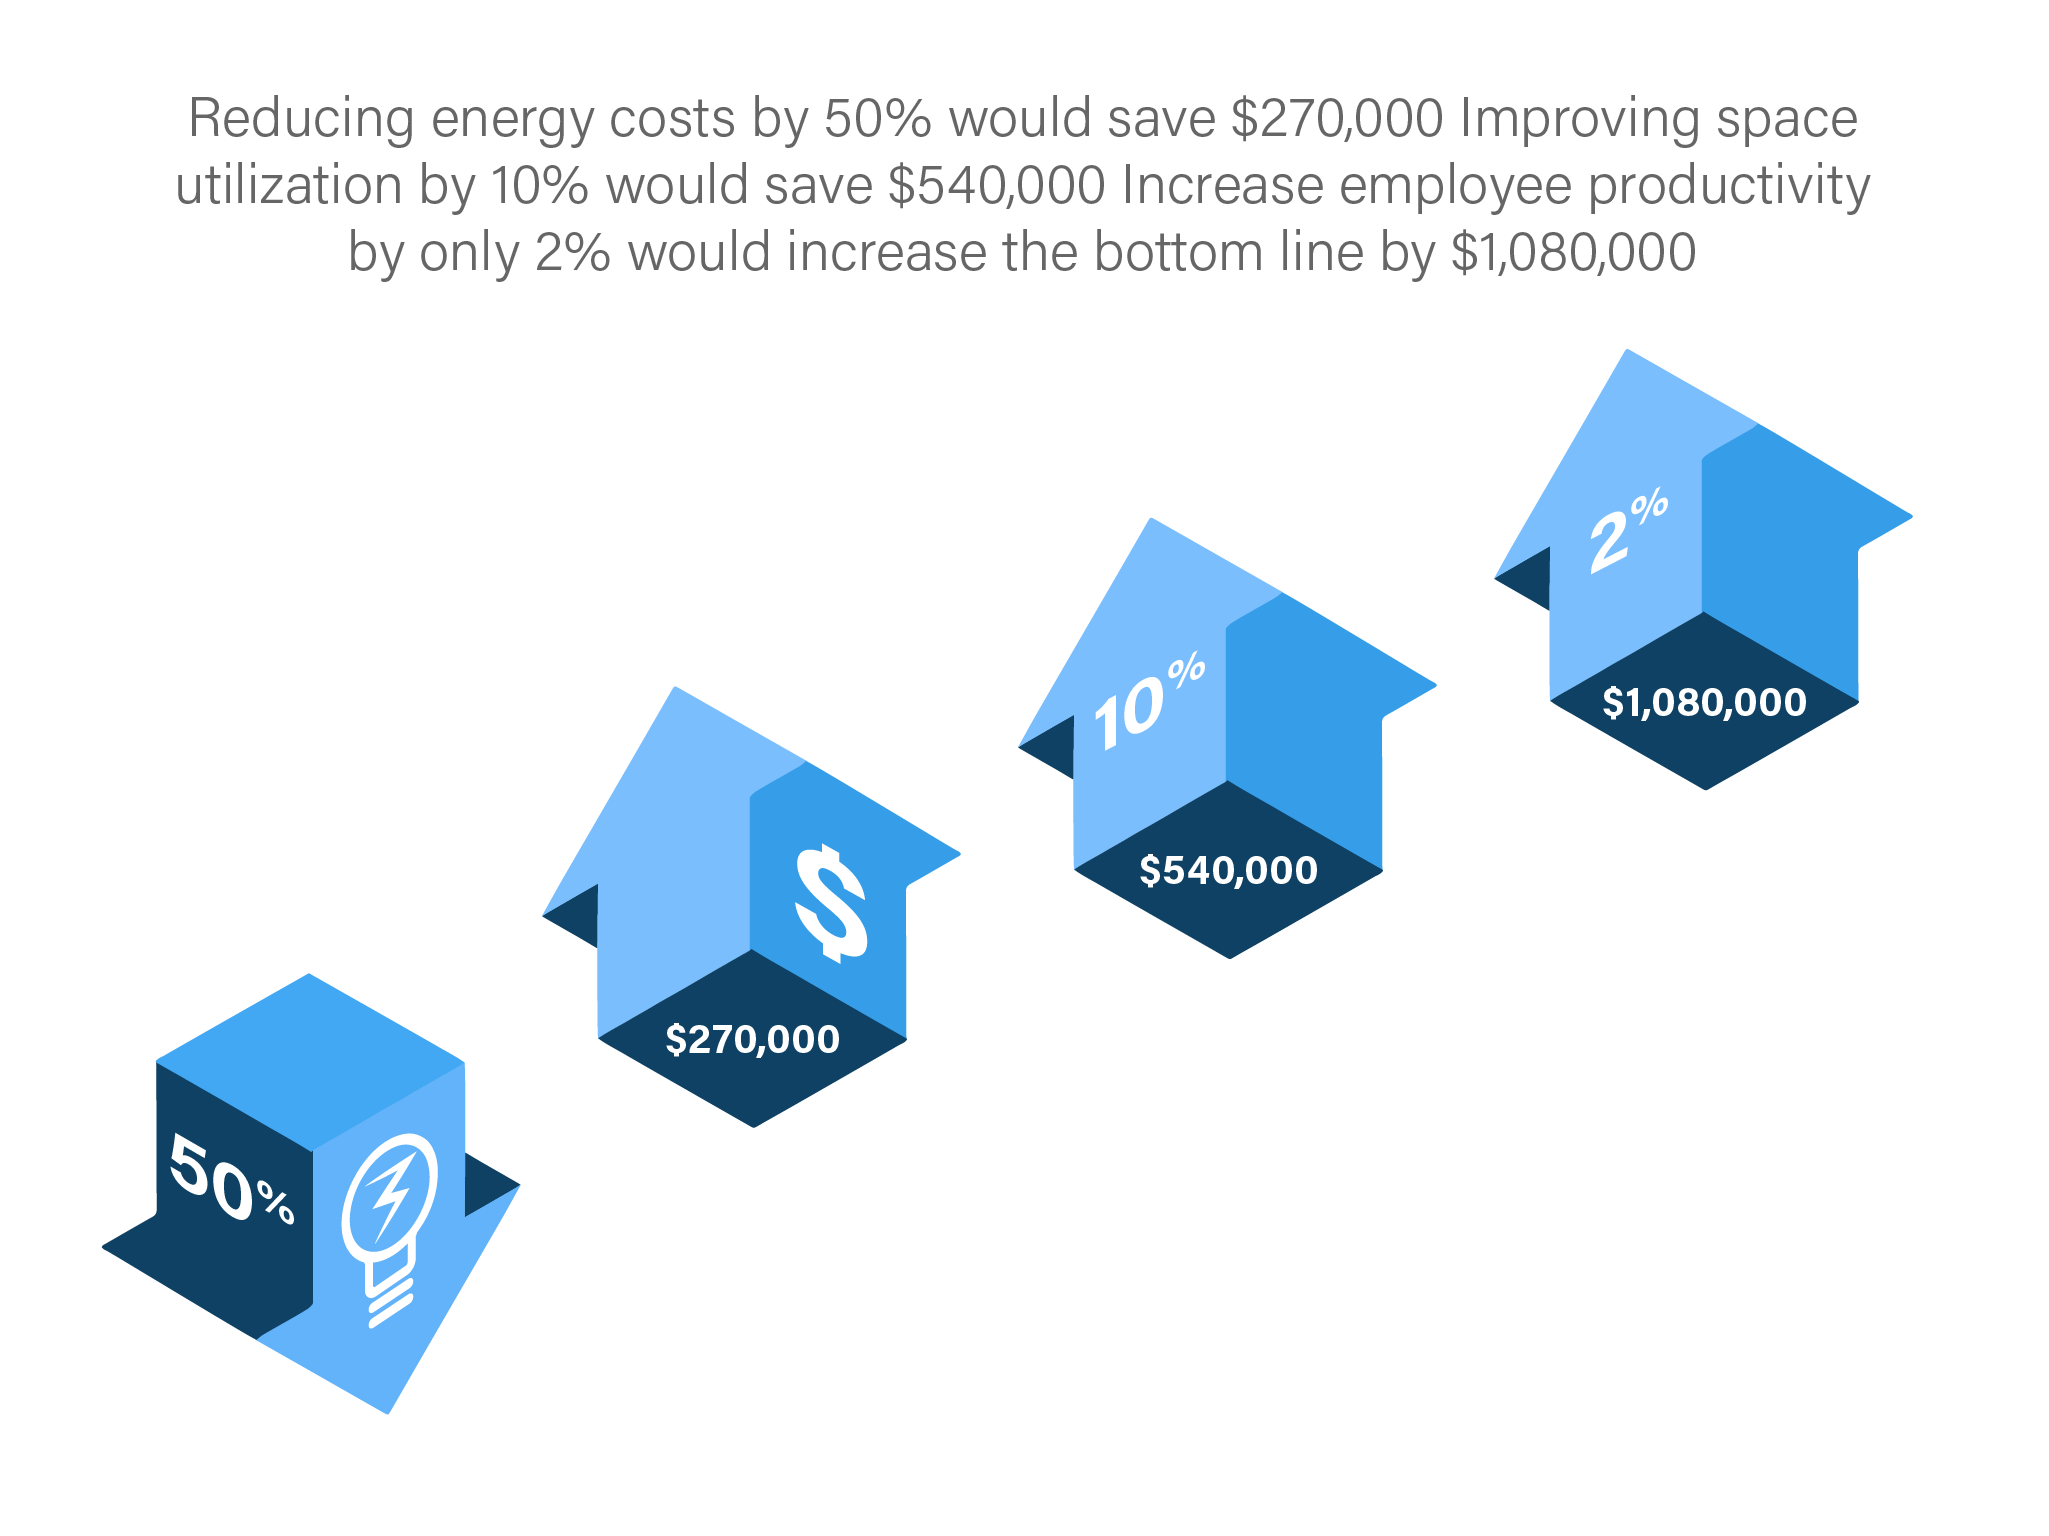 Reducing energy costs by 50% would save $270,000. Improving space utilization by 10% would save $540,000. Increasing employee productivity by only 2% would increase the bottom line by $1,080,000.